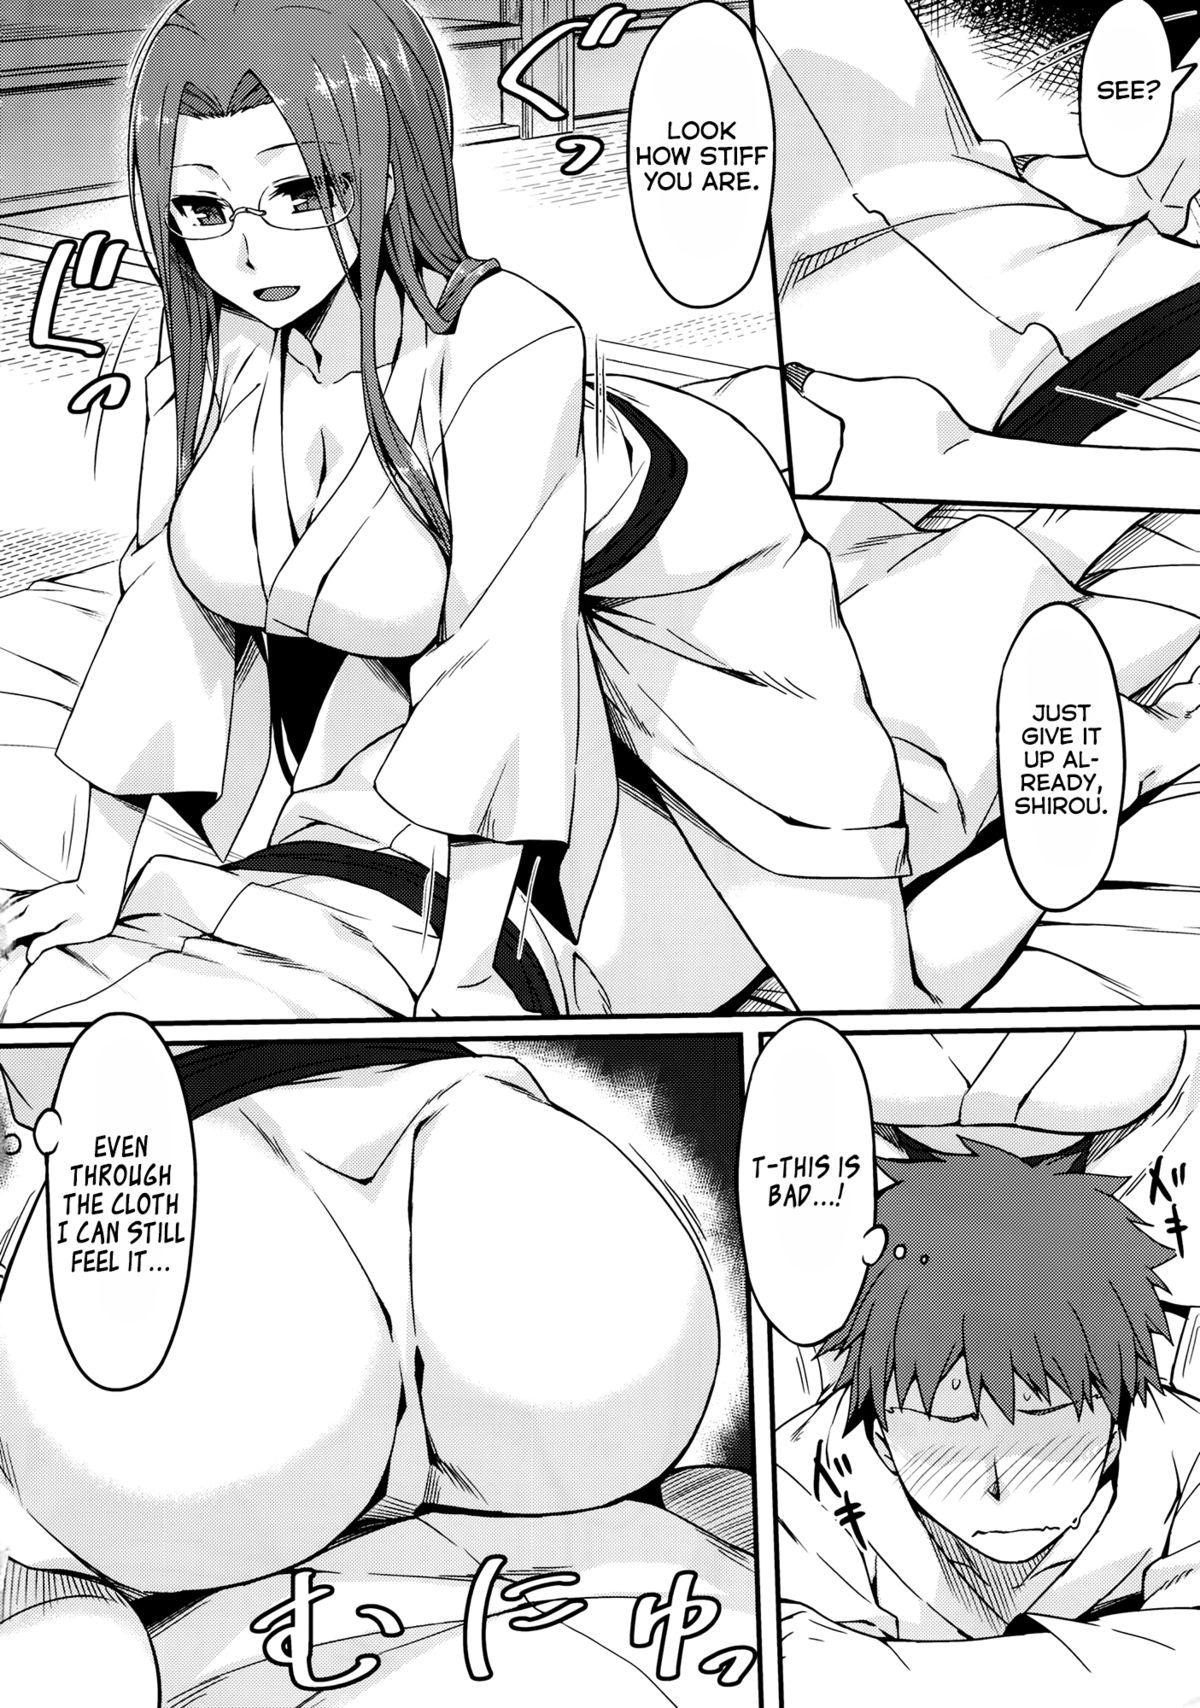 Orgia (C88) [S.S.L (Yanagi)] Rider-san to Onsen Yado. Sonogo | Hot Spring Inn With Rider-san. After Story (Fate/stay night) [English] [Facedesk] - Fate stay night Chupada - Page 4